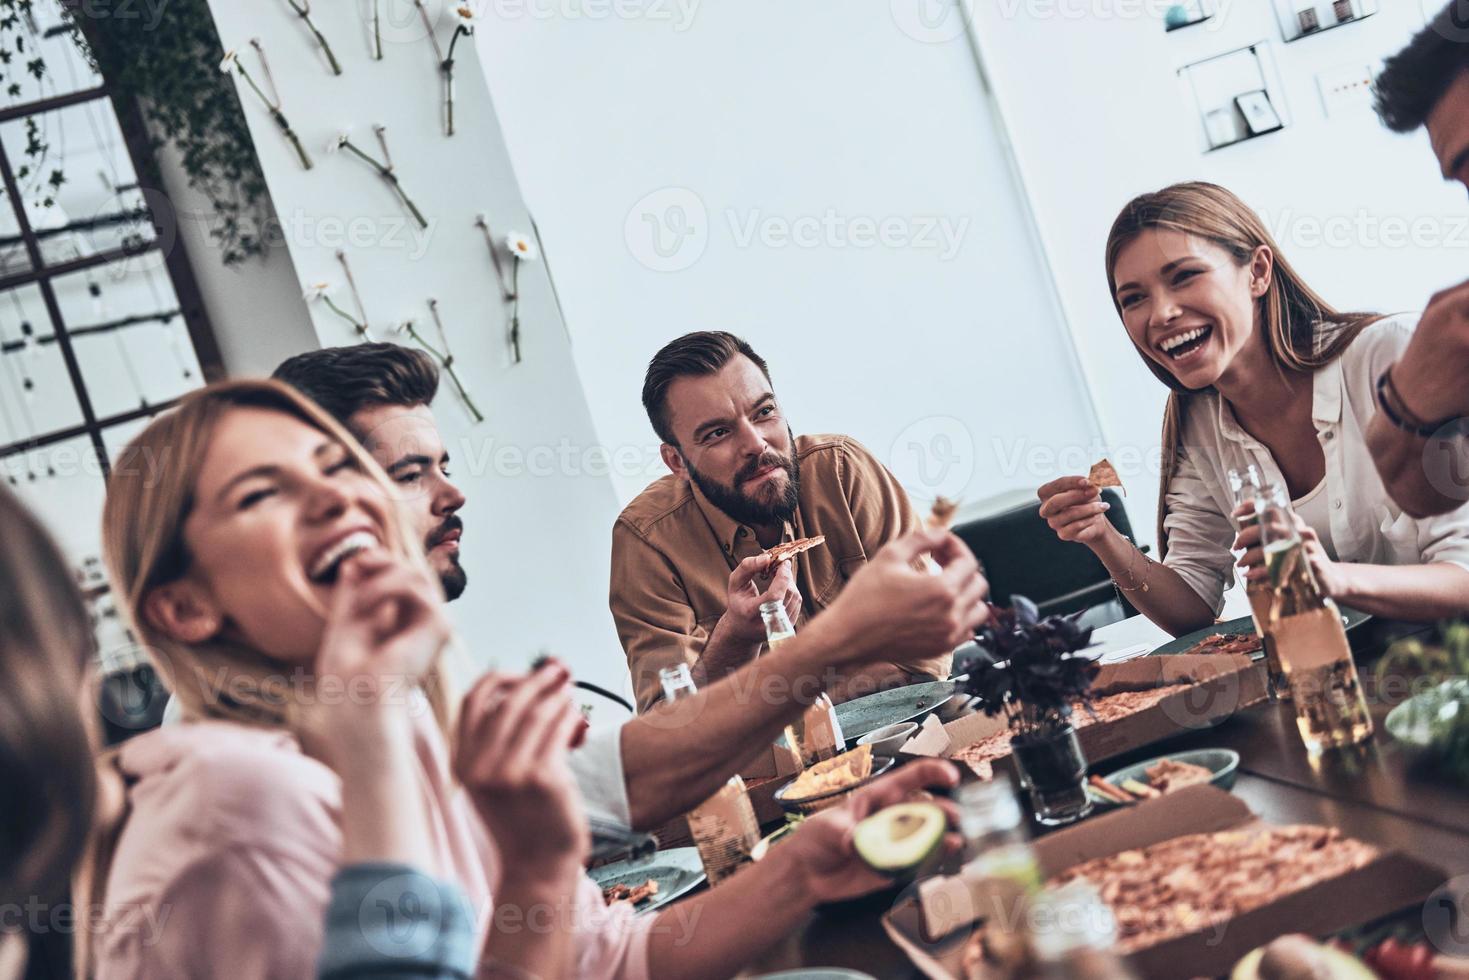 So much fun together Group of young people in casual wear eating and smiling while having a dinner party photo